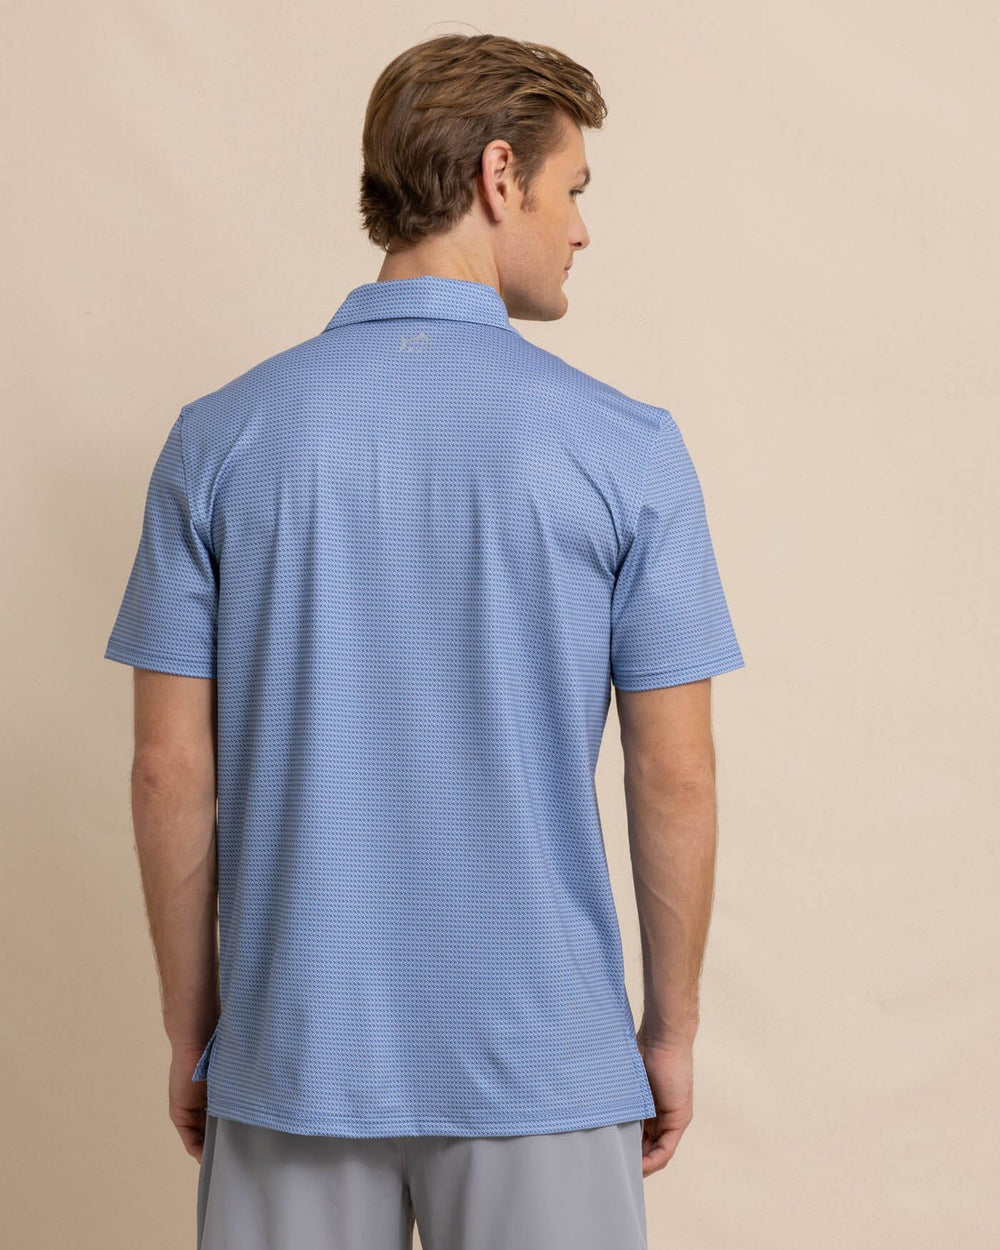 The back view of the Southern Tide Driver Getting Ziggy With It Printed Polo by Southern Tide - Coronet Blue